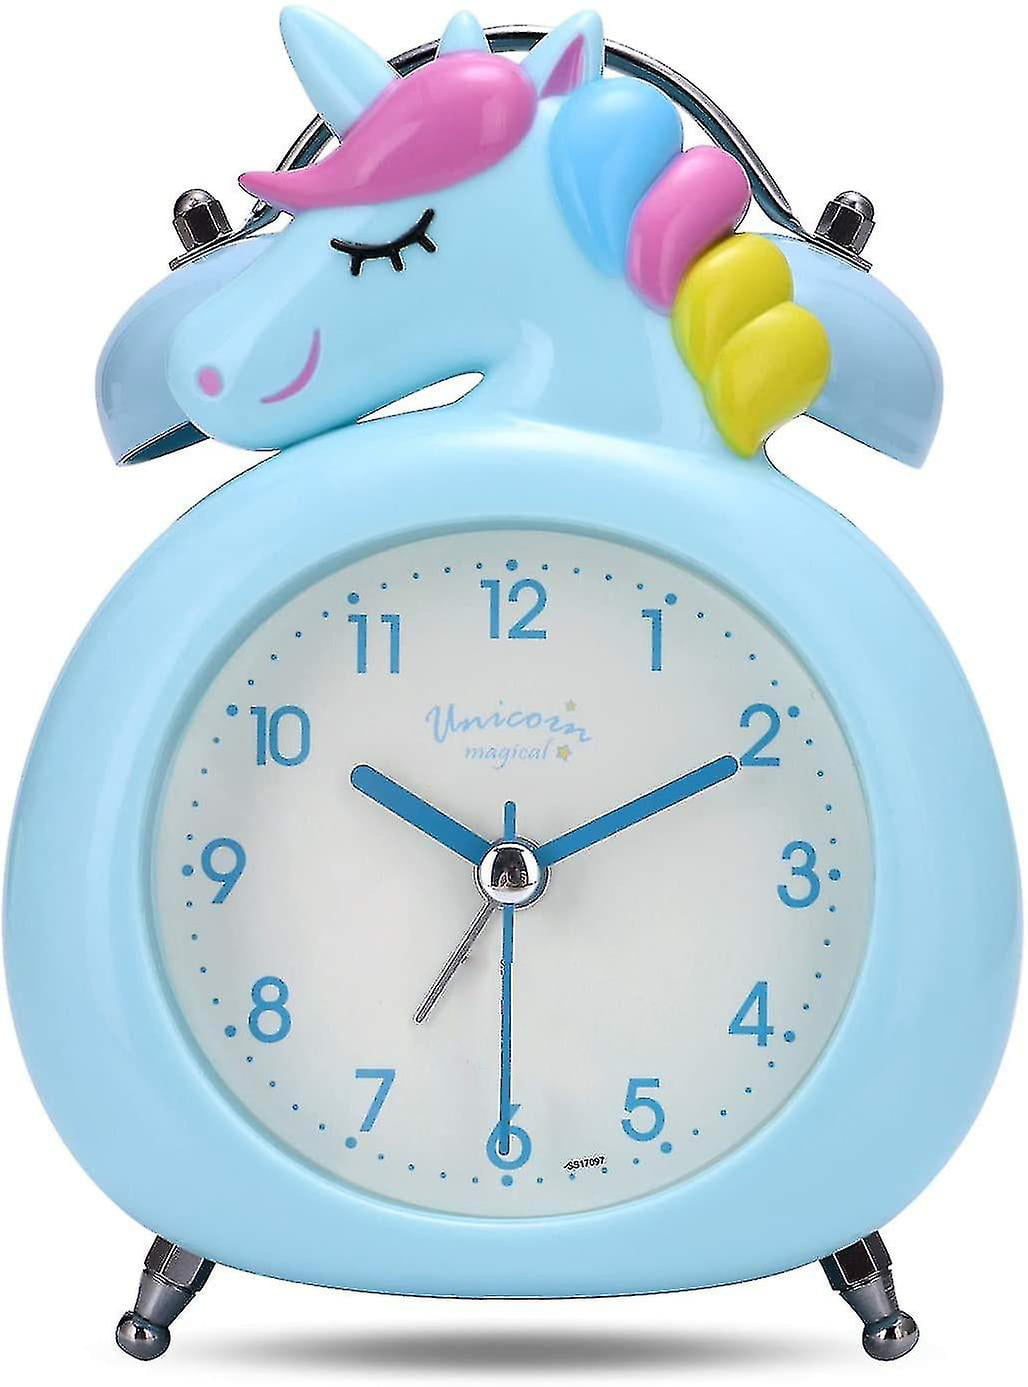 Details about   Unicorn Alarm Clock Gift LED Christmas Light Fancy Horse Birthday Gift Toy Deco 